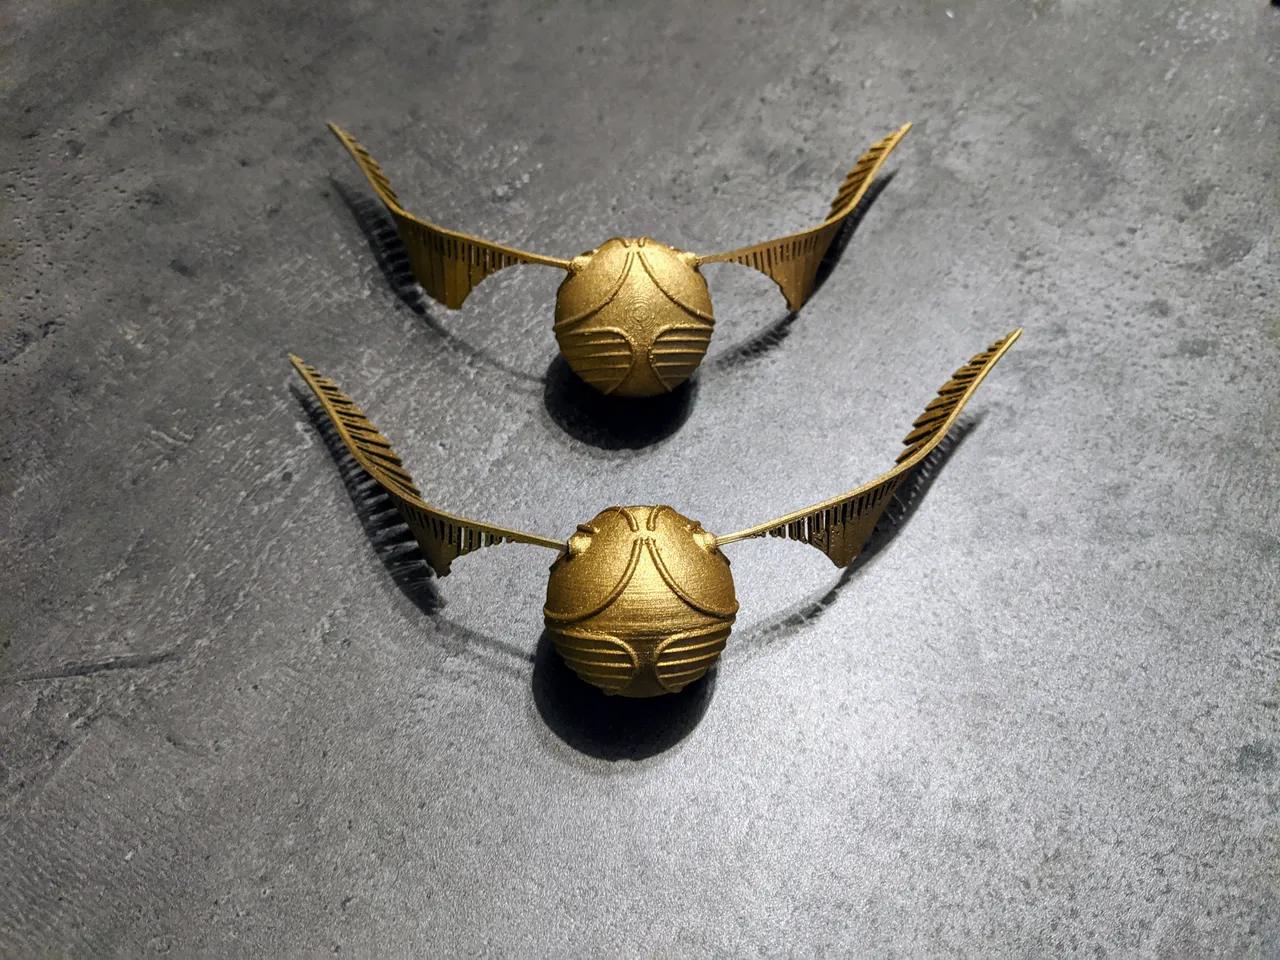 3D Golden Snitch from Harry Potter - Finished Projects - Blender Artists  Community